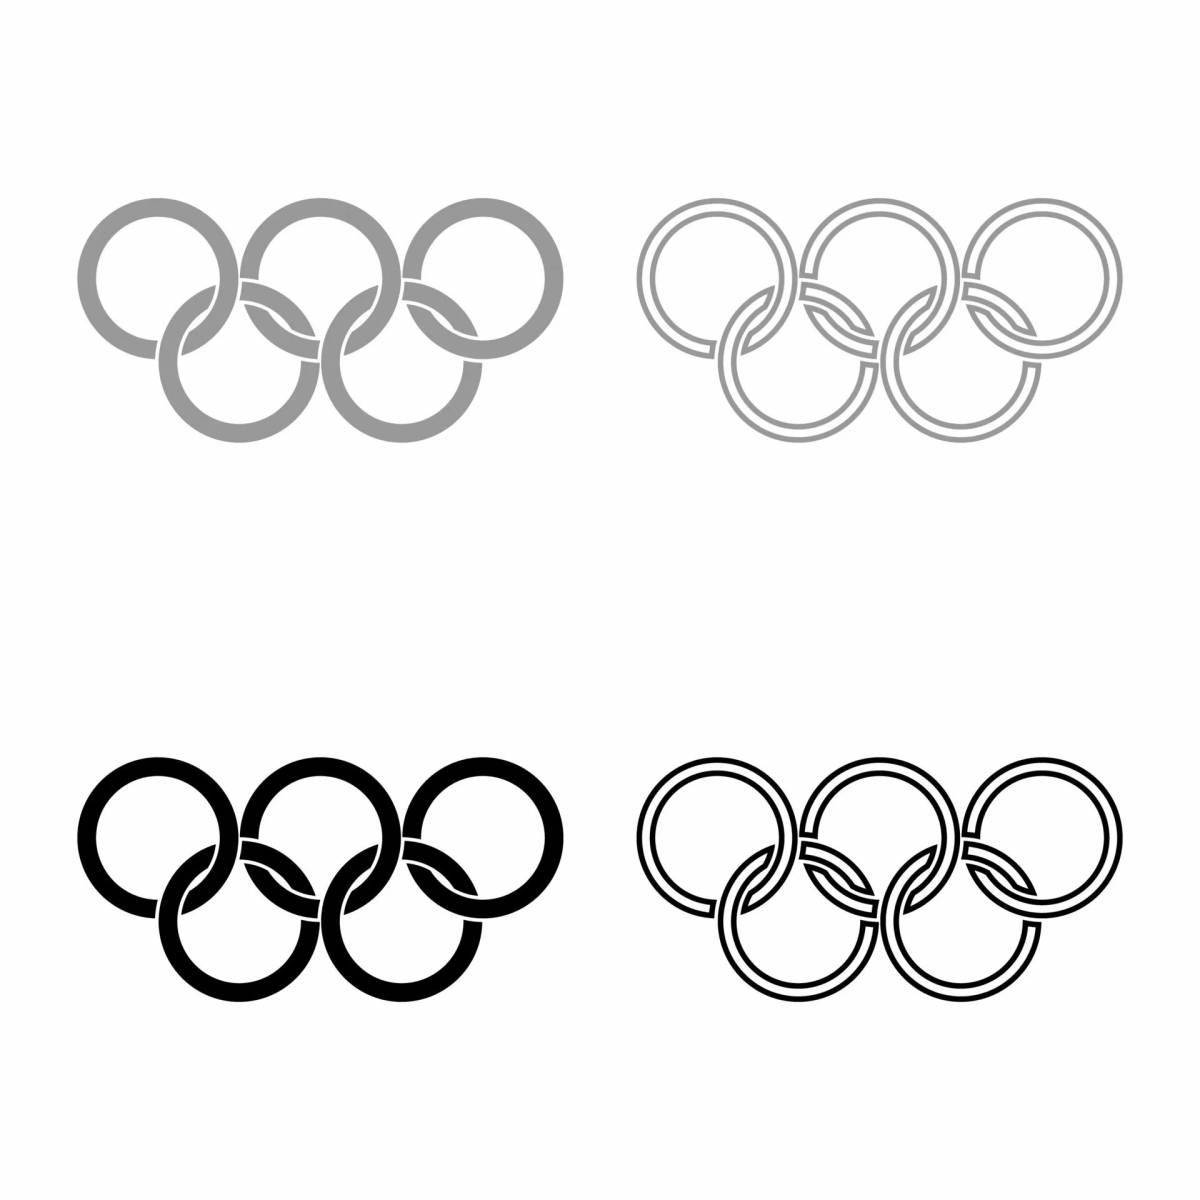 Creative olympic rings coloring for kids